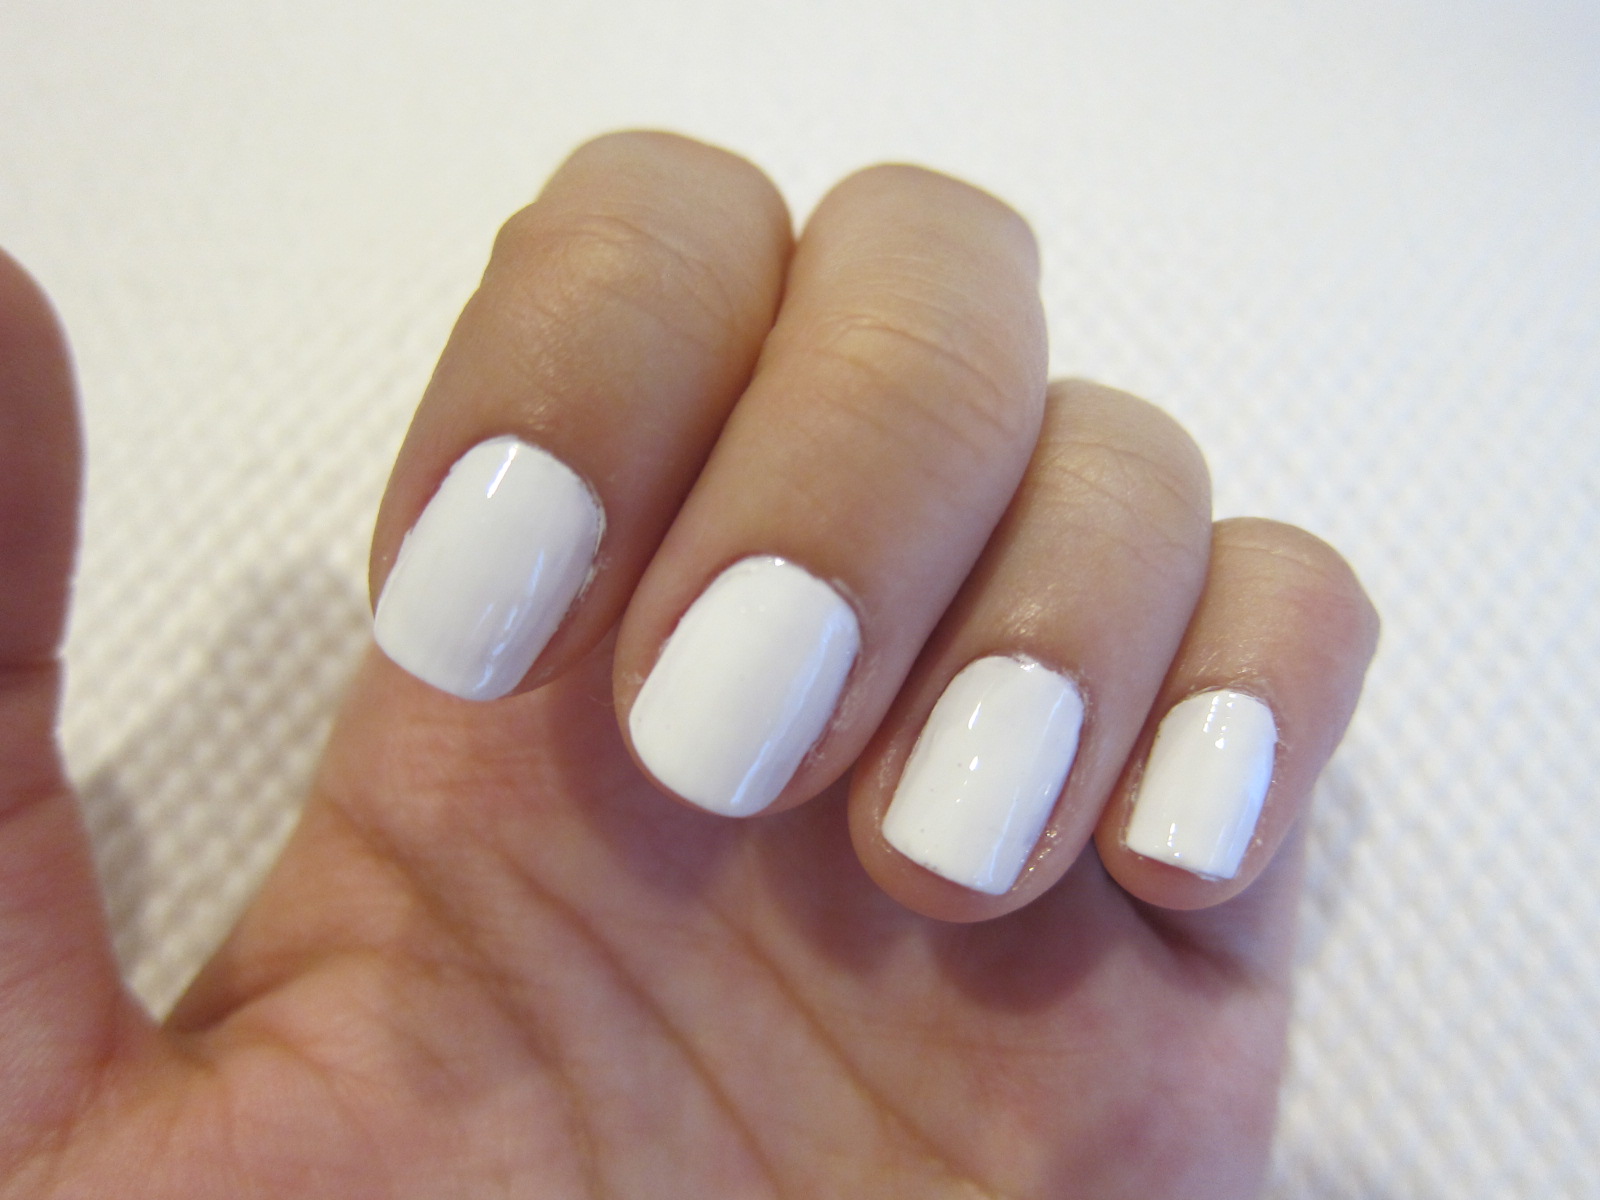 10. Orly Nail Lacquer in "White Tips" - wide 2